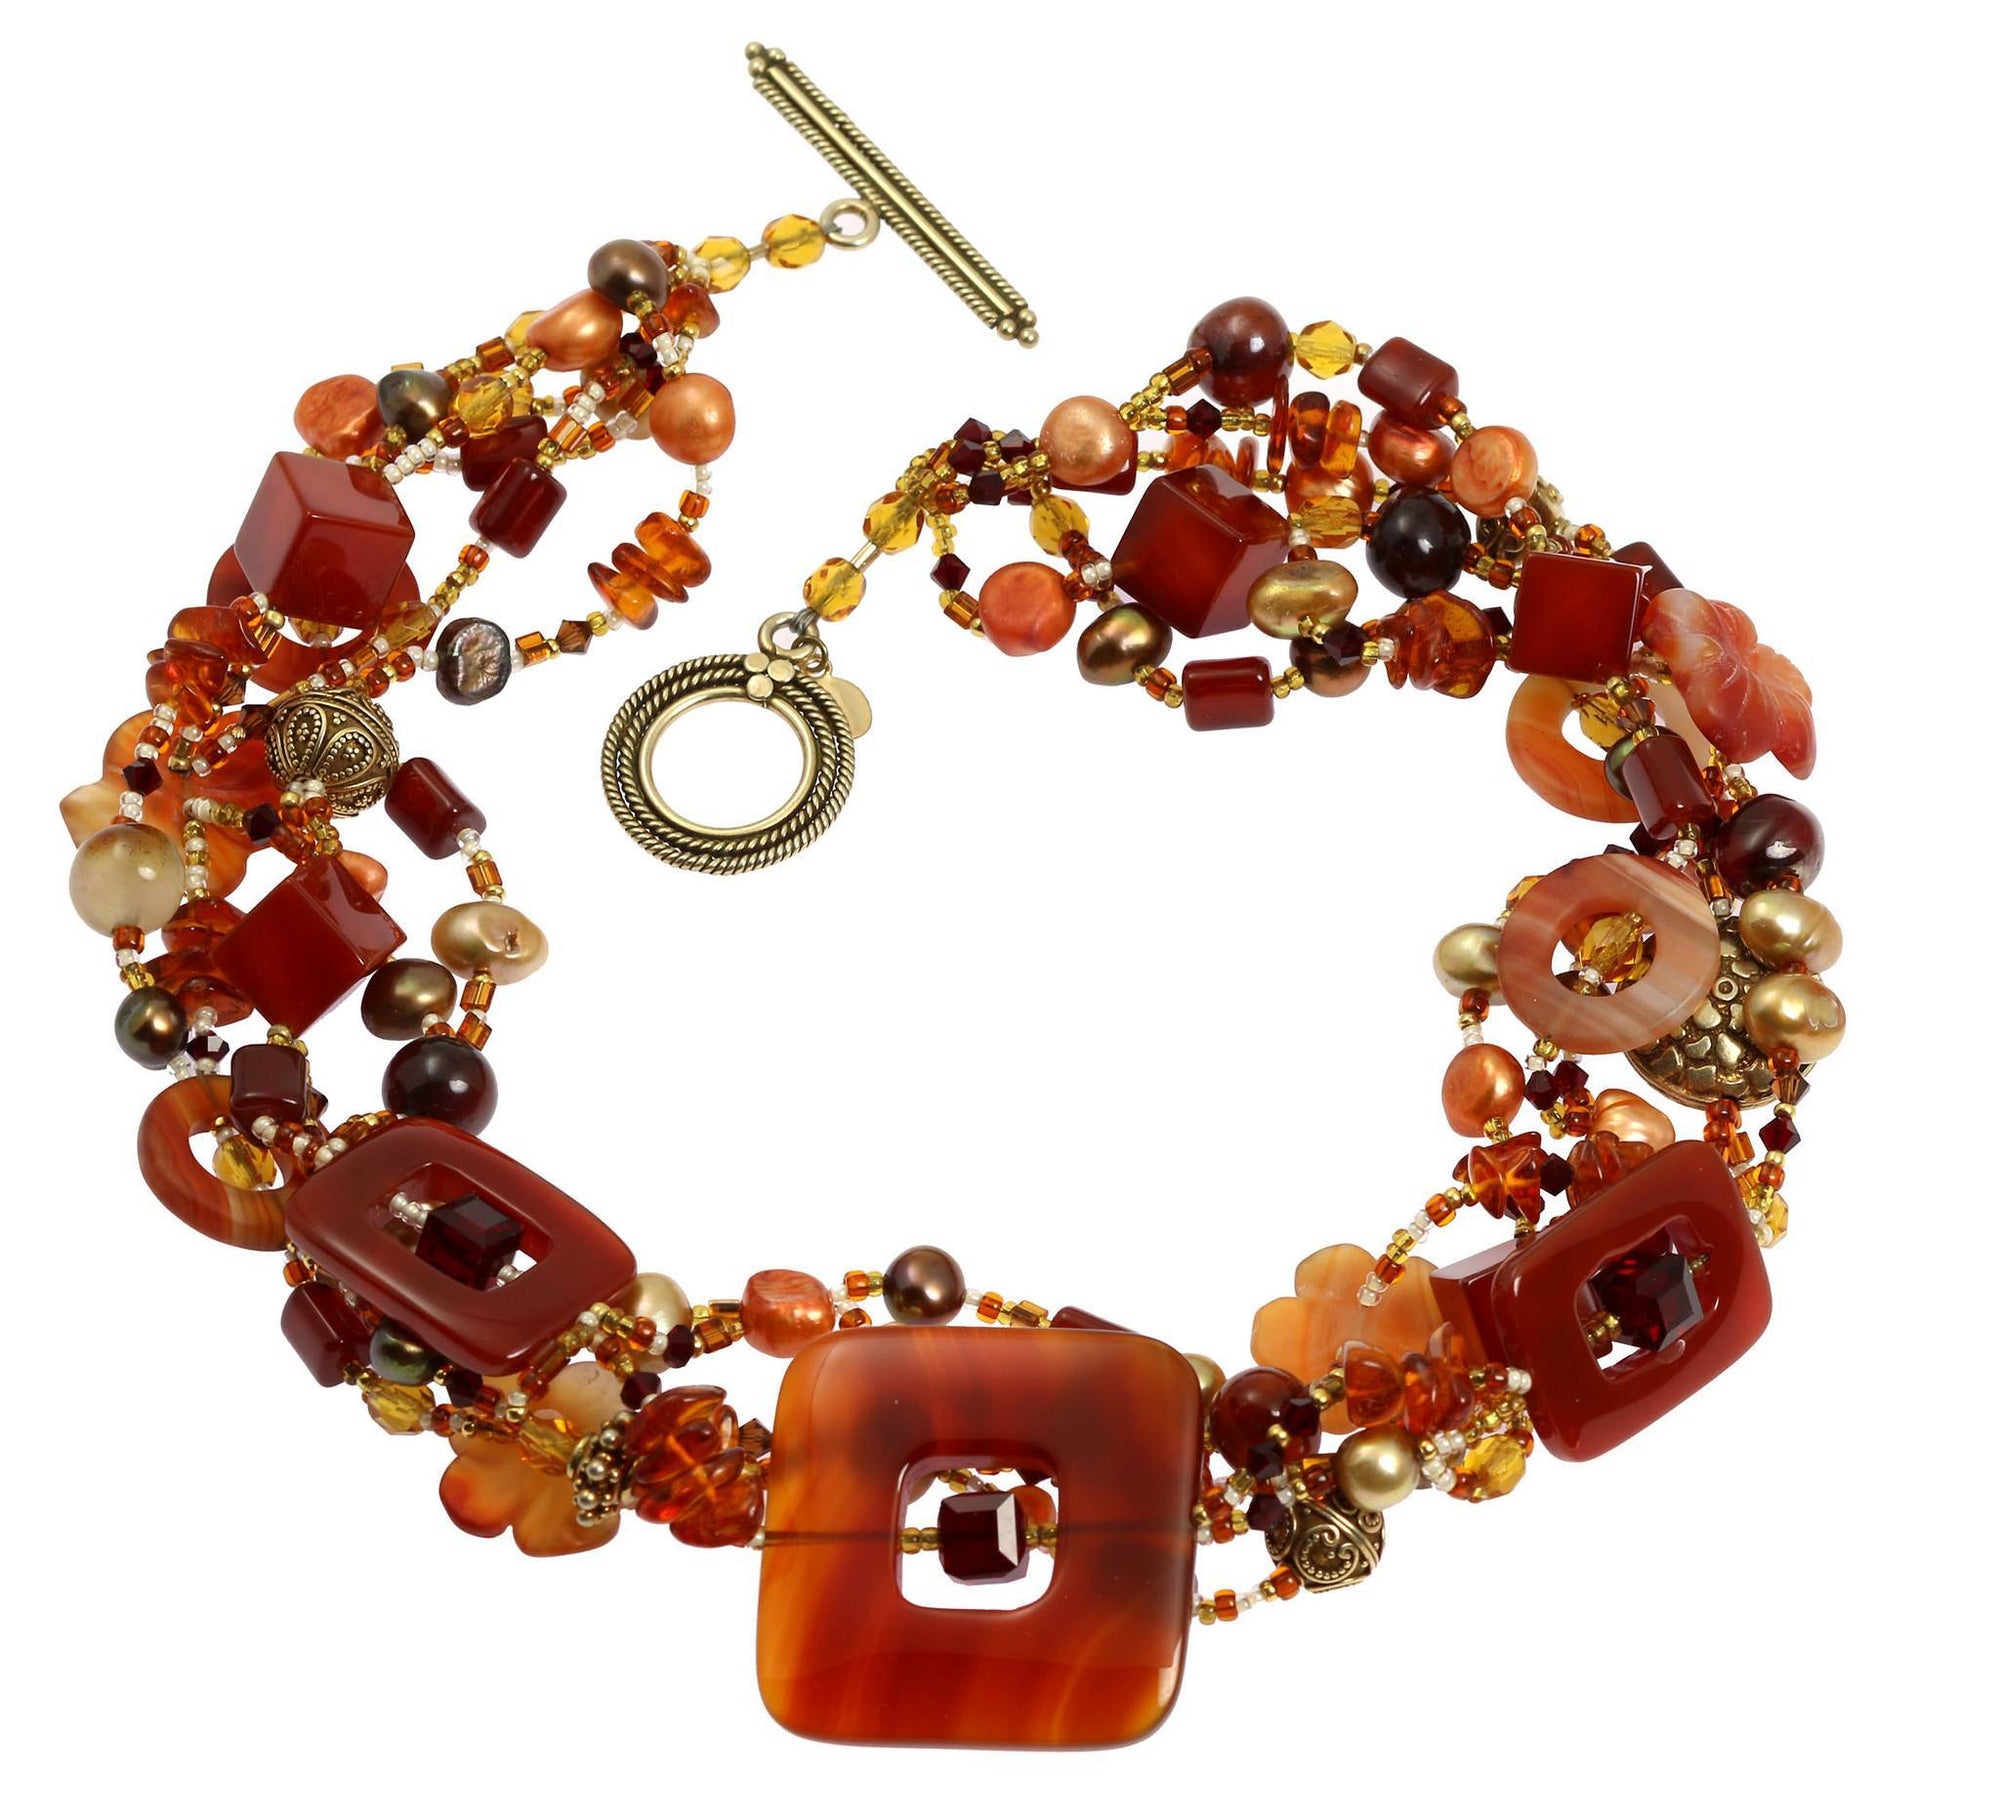 Detail of Square Carnelian Beaded Gemstone Necklace